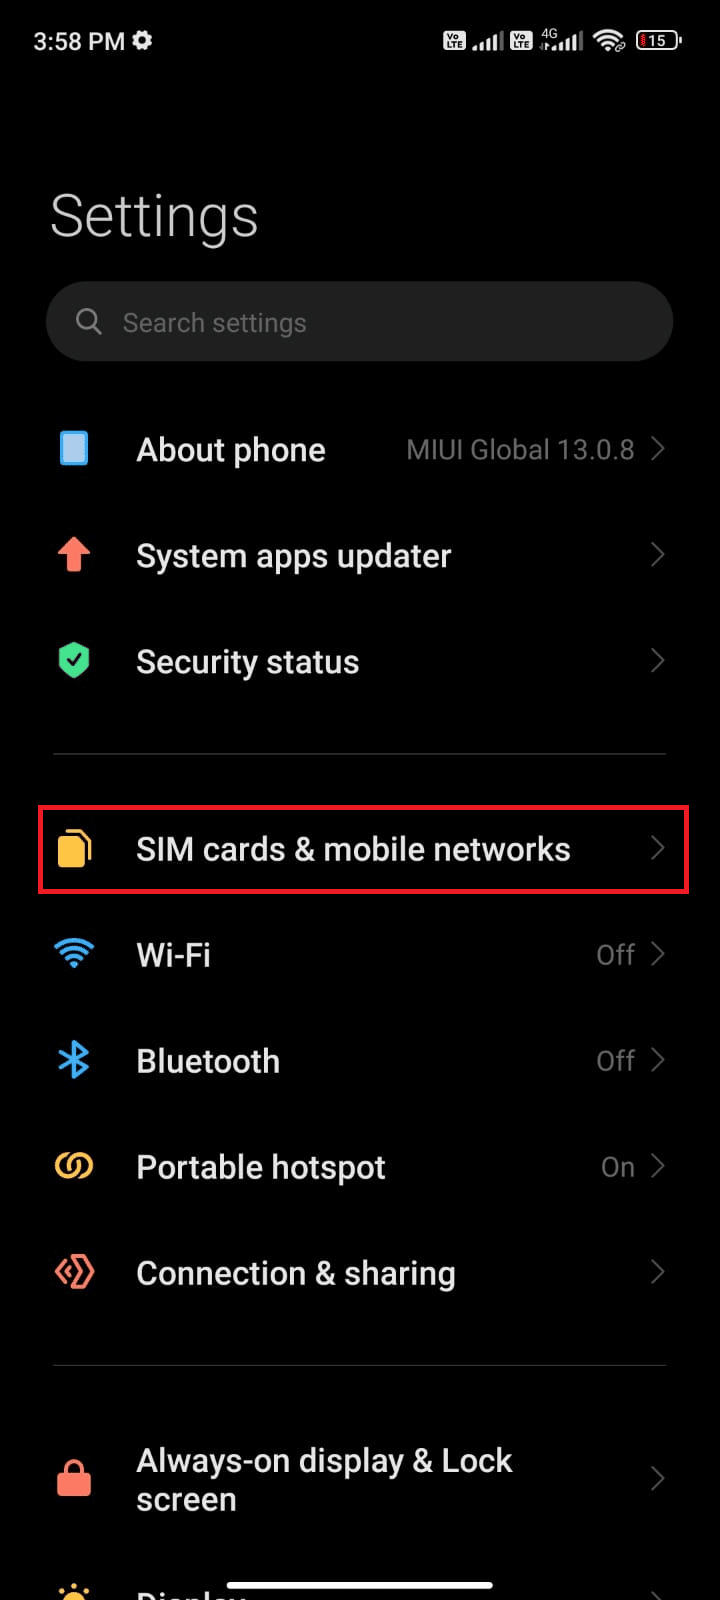 Then, tap the SIM cards mobile networks option 